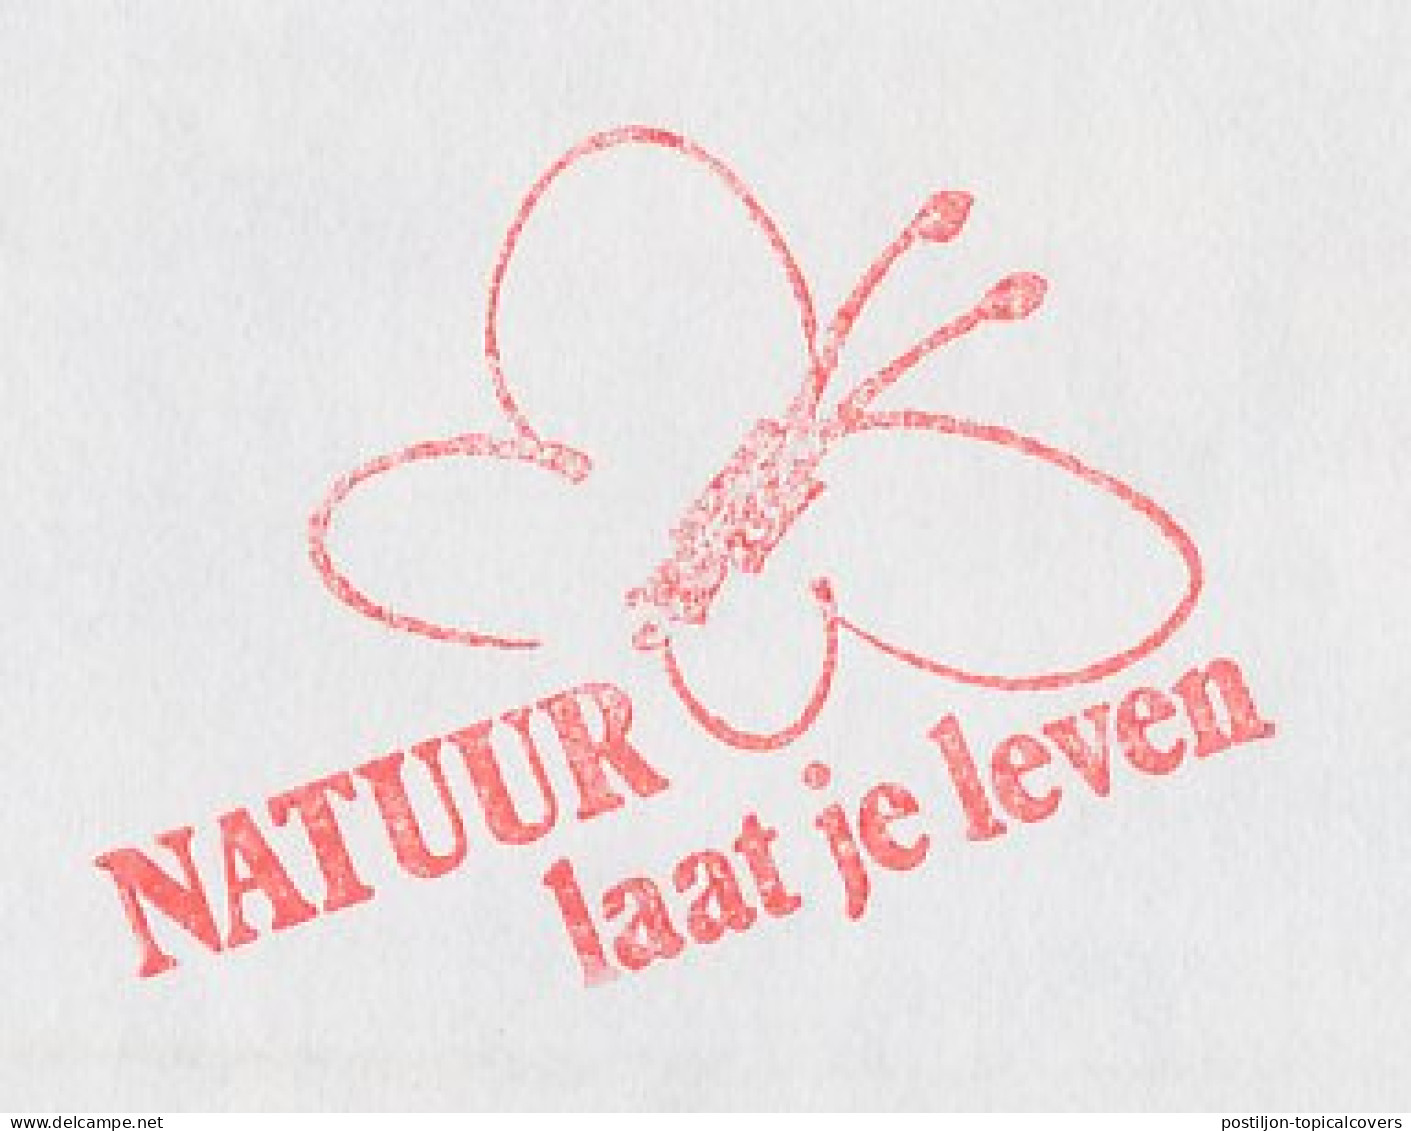 Meter Cover Netherlands 1988 Butterfly - Nature Lets You Live - S-Graveland - Other & Unclassified